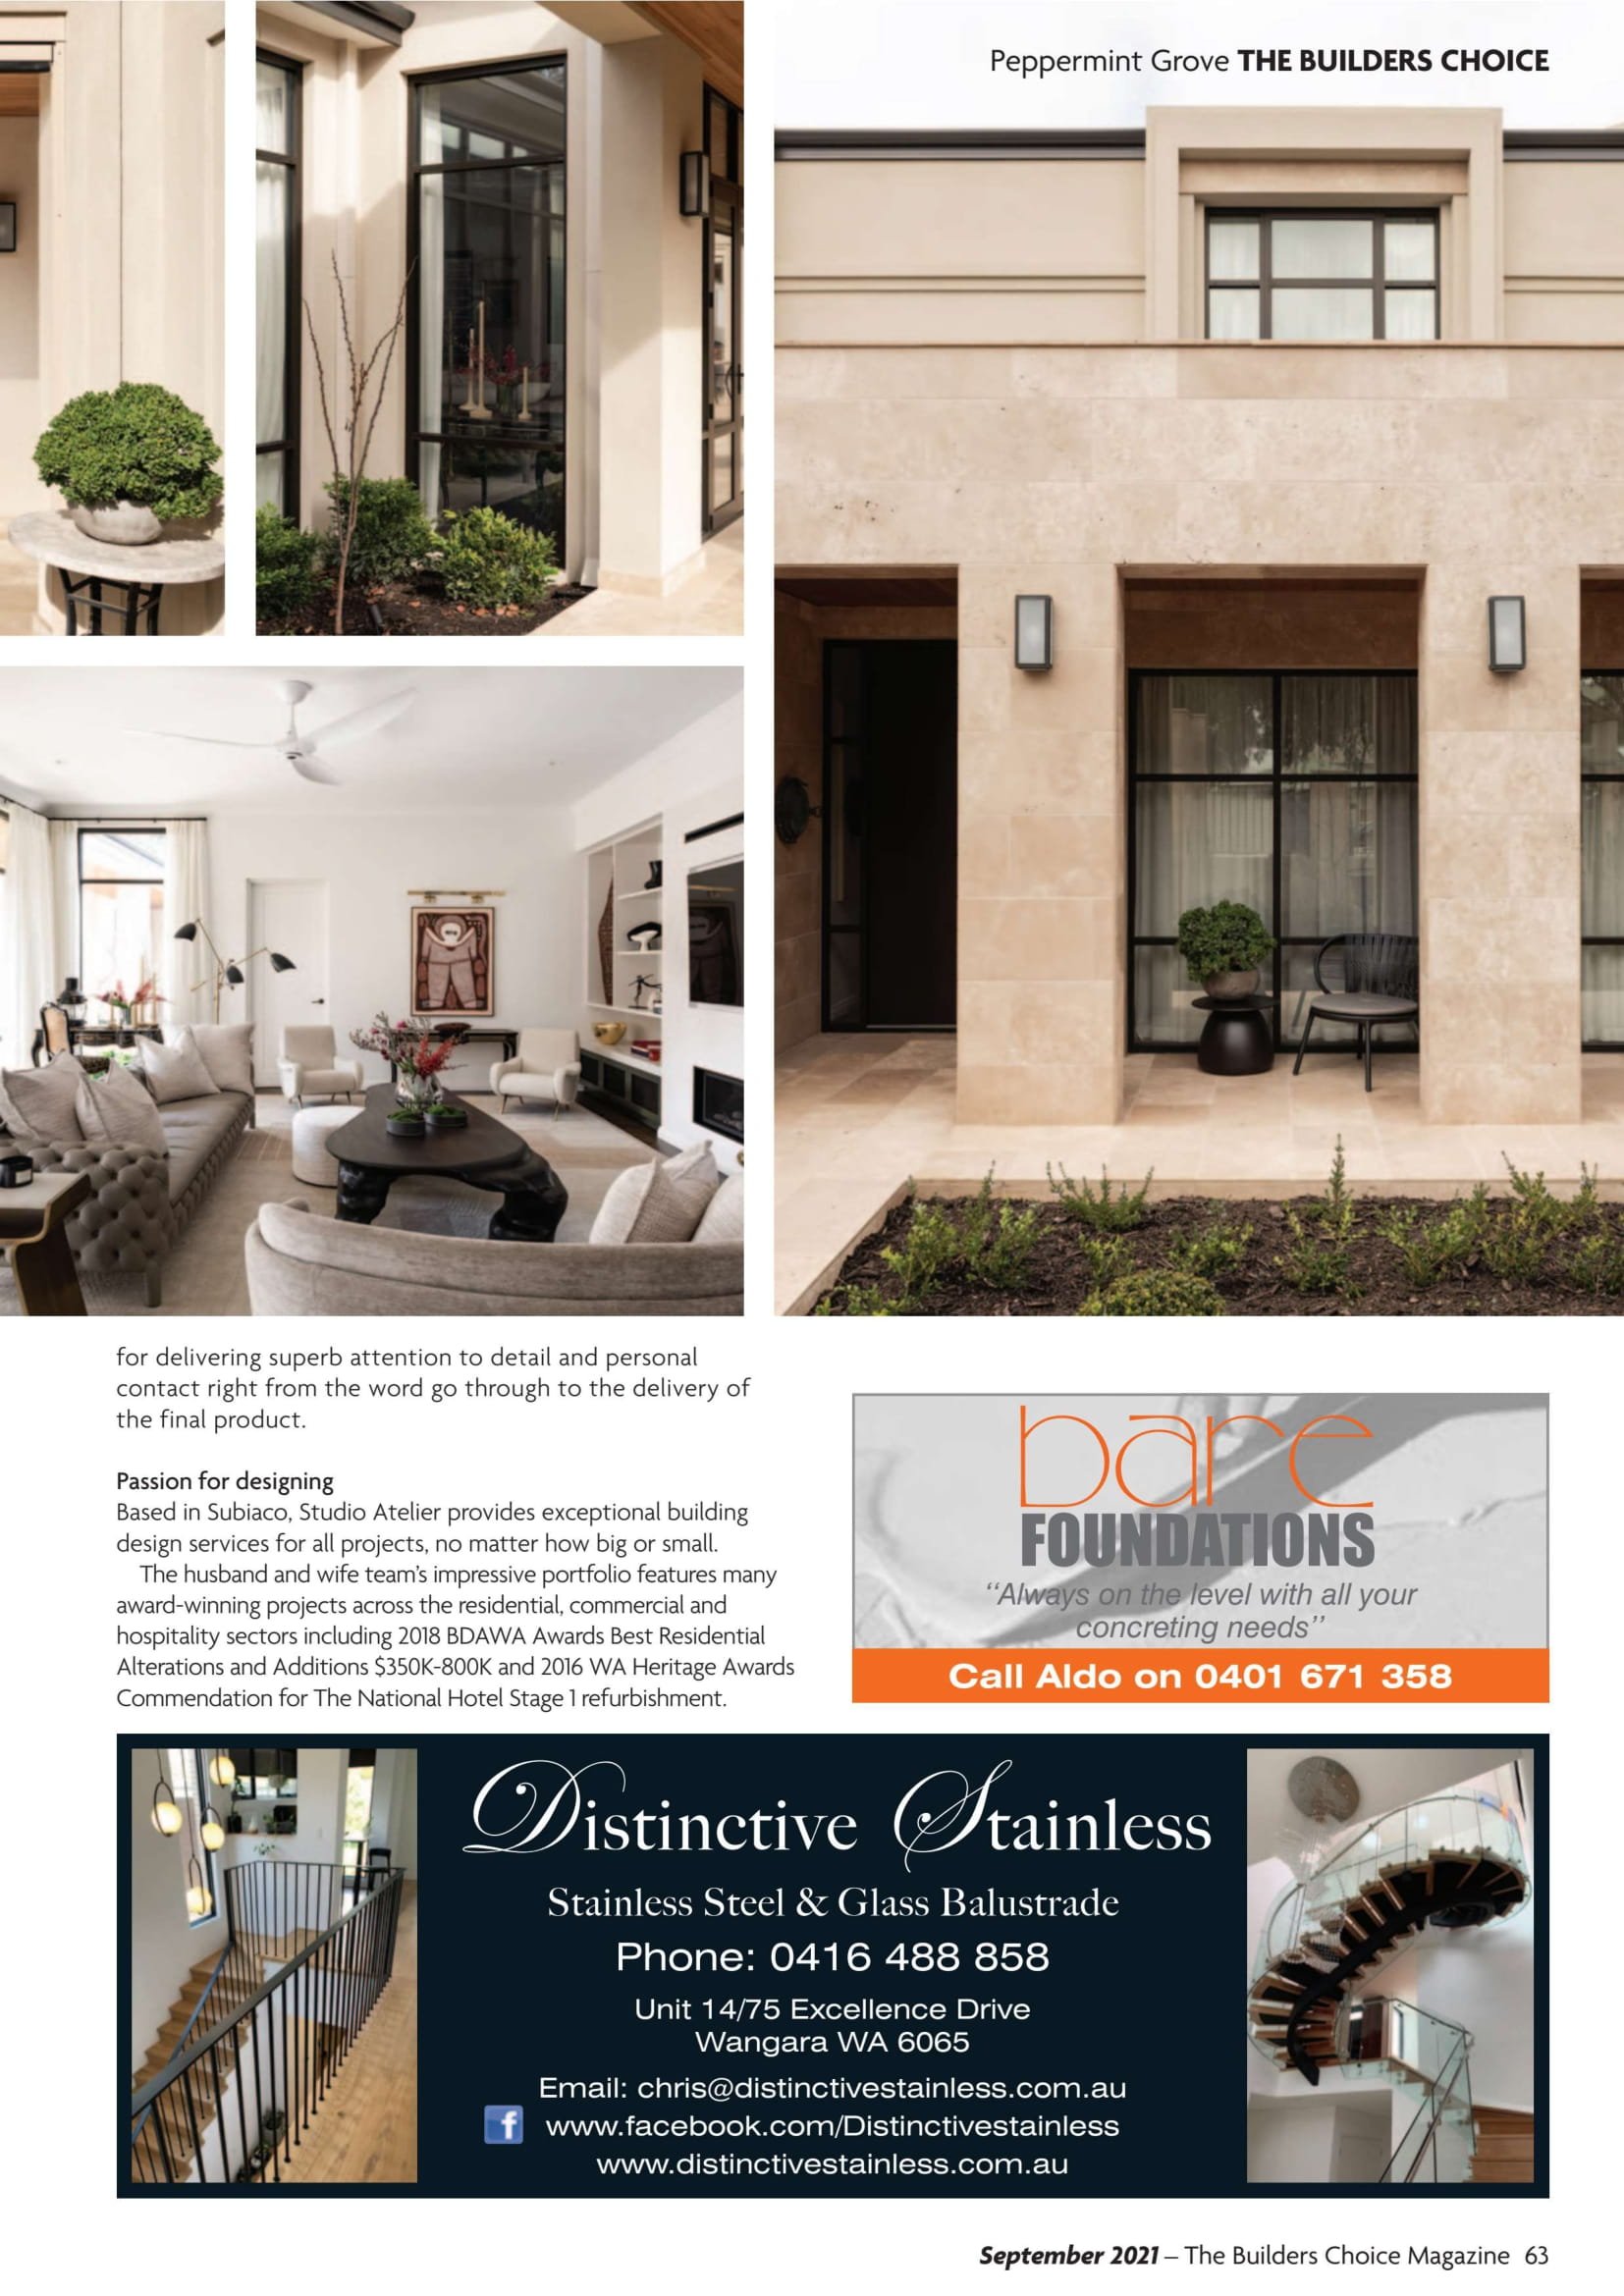 Builders Choice Magazine Sept 2021 select pages-4.jpg